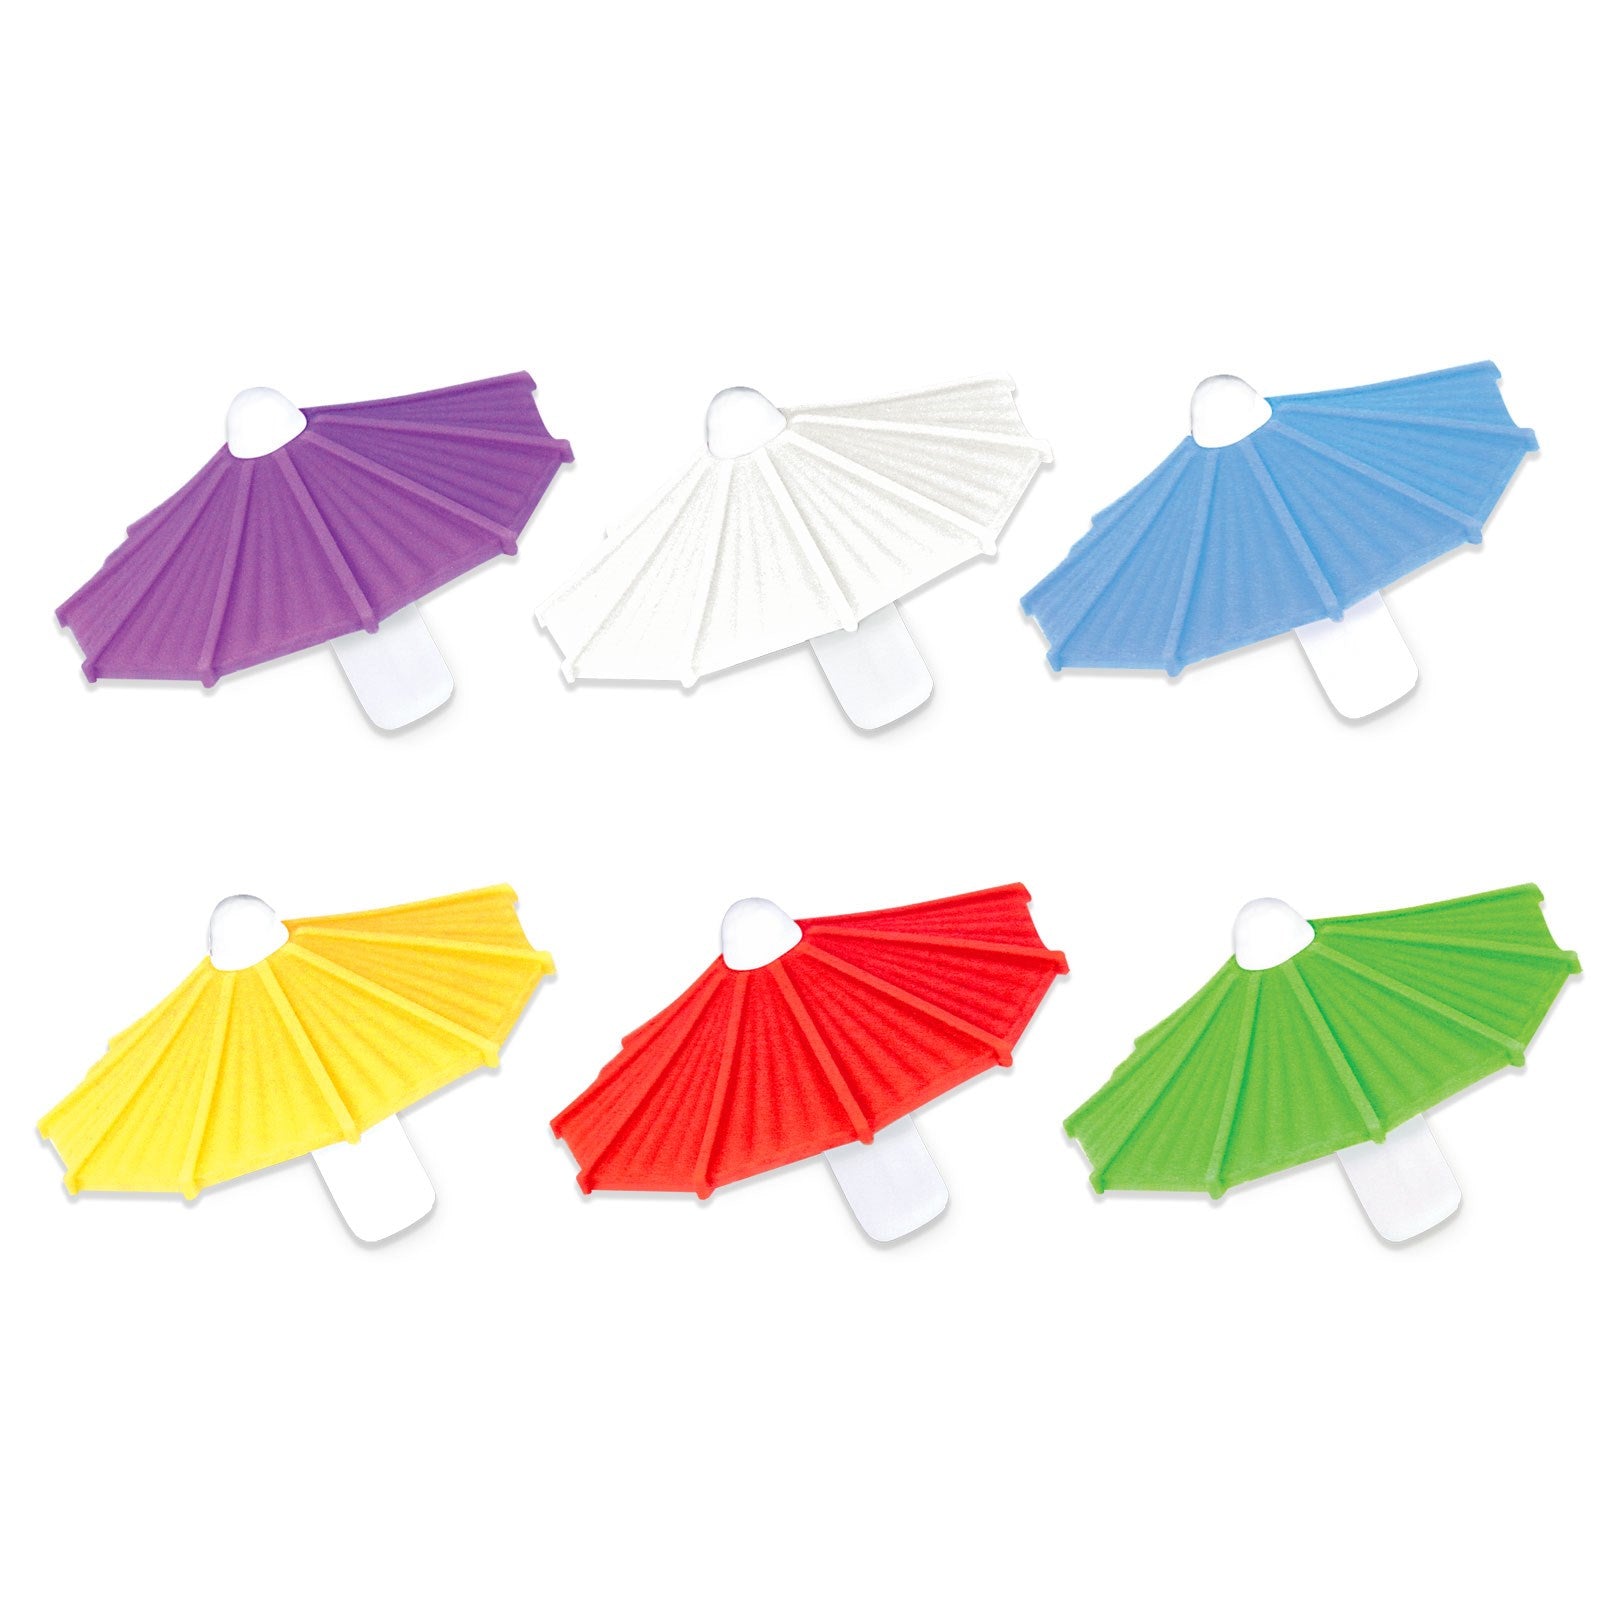 six different colored silicone umbrella drink markers on a white background